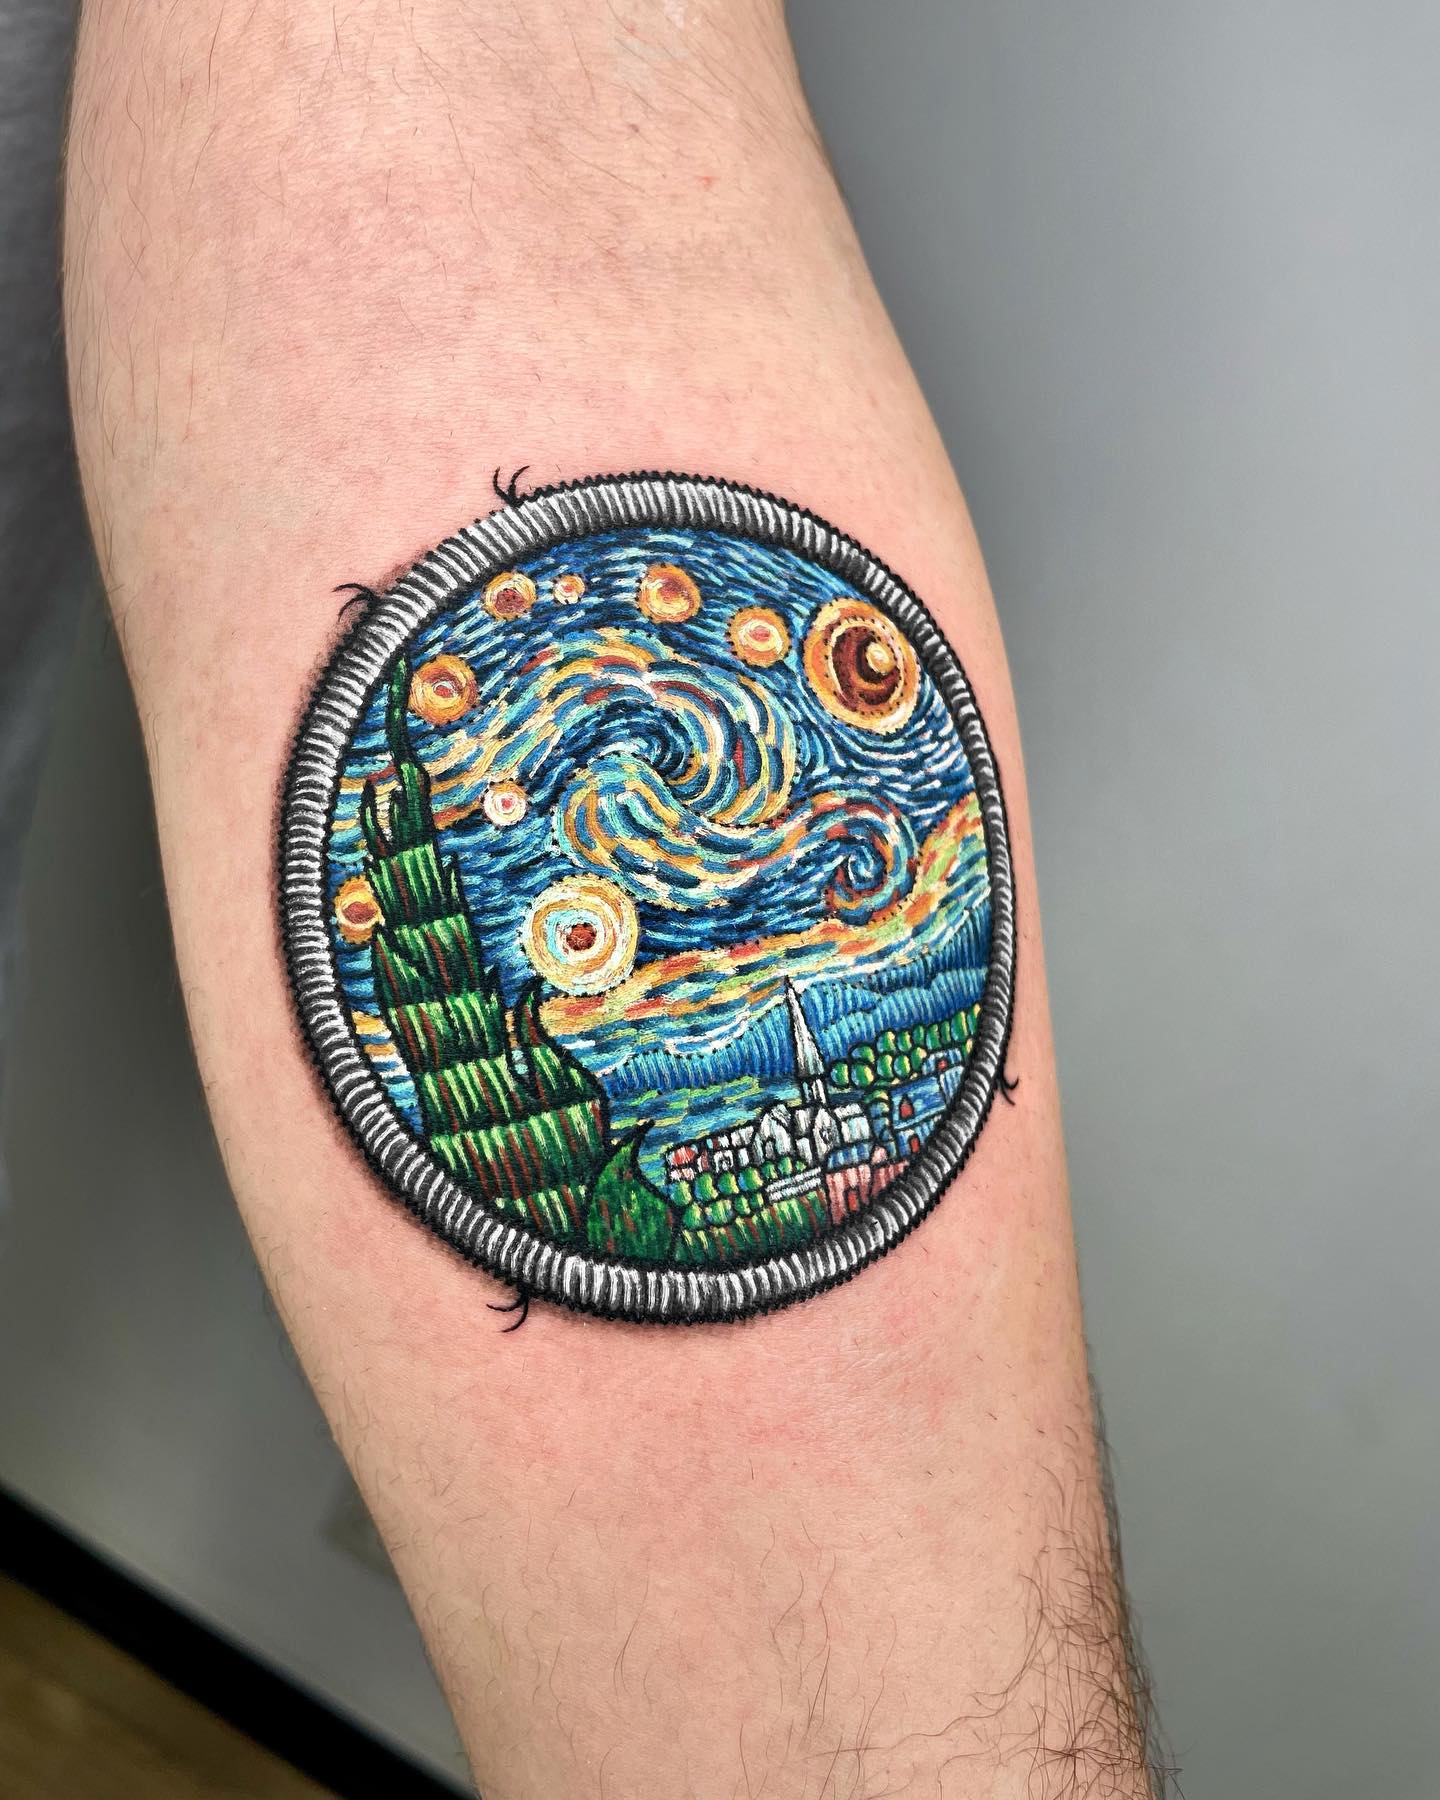 Patch-style embroidery tattoo with Van Gogh’s Starry Night